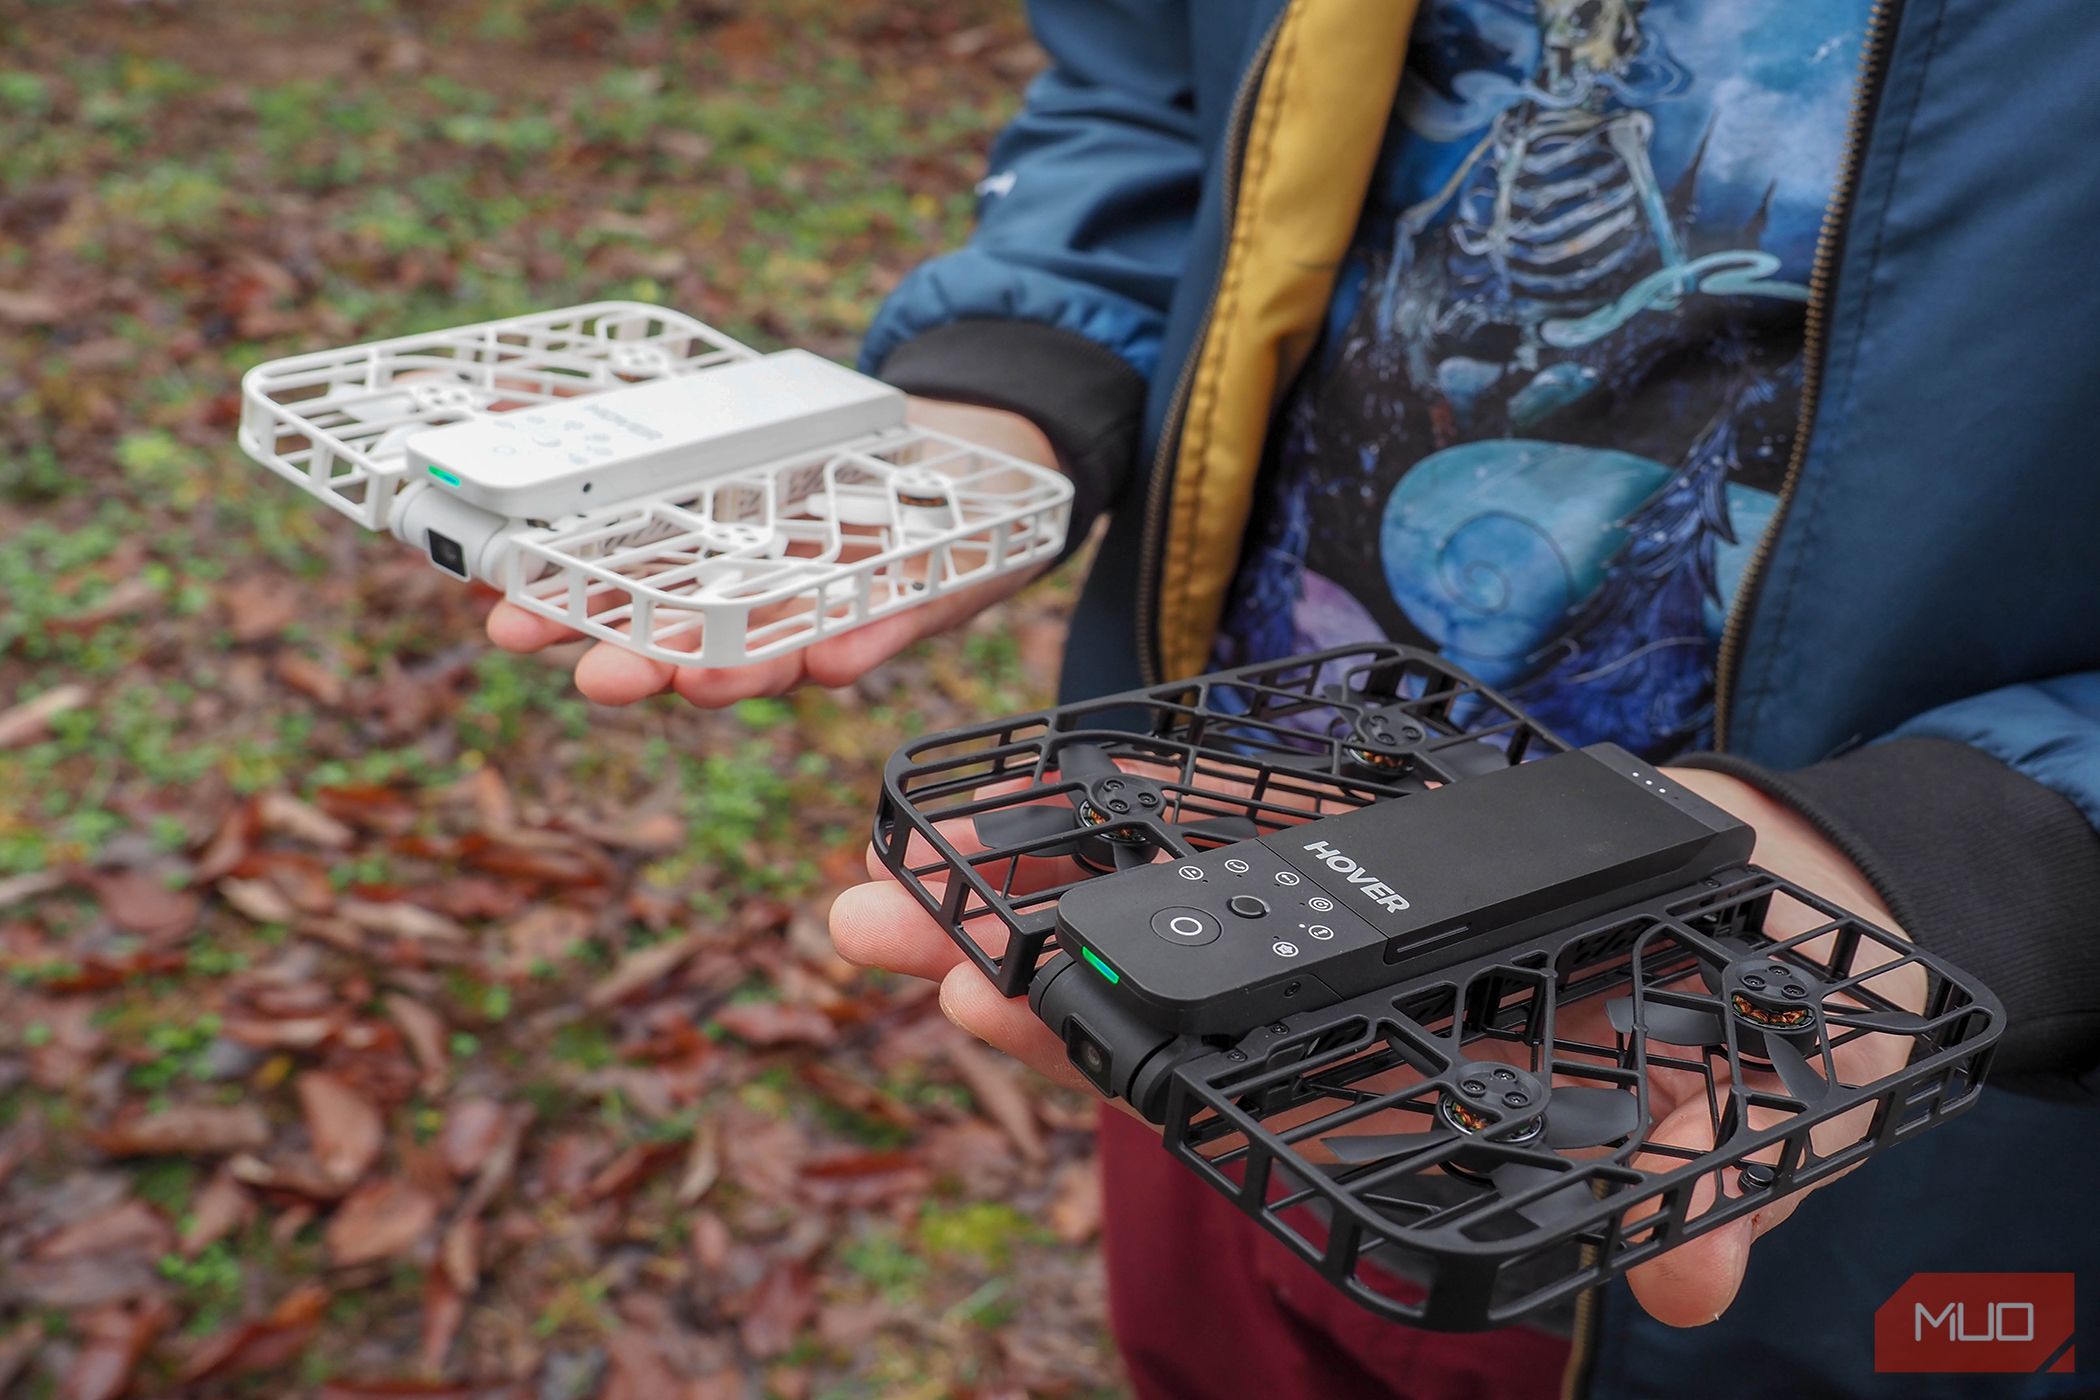 Hover Air X1 Drone Case by Creative 3D